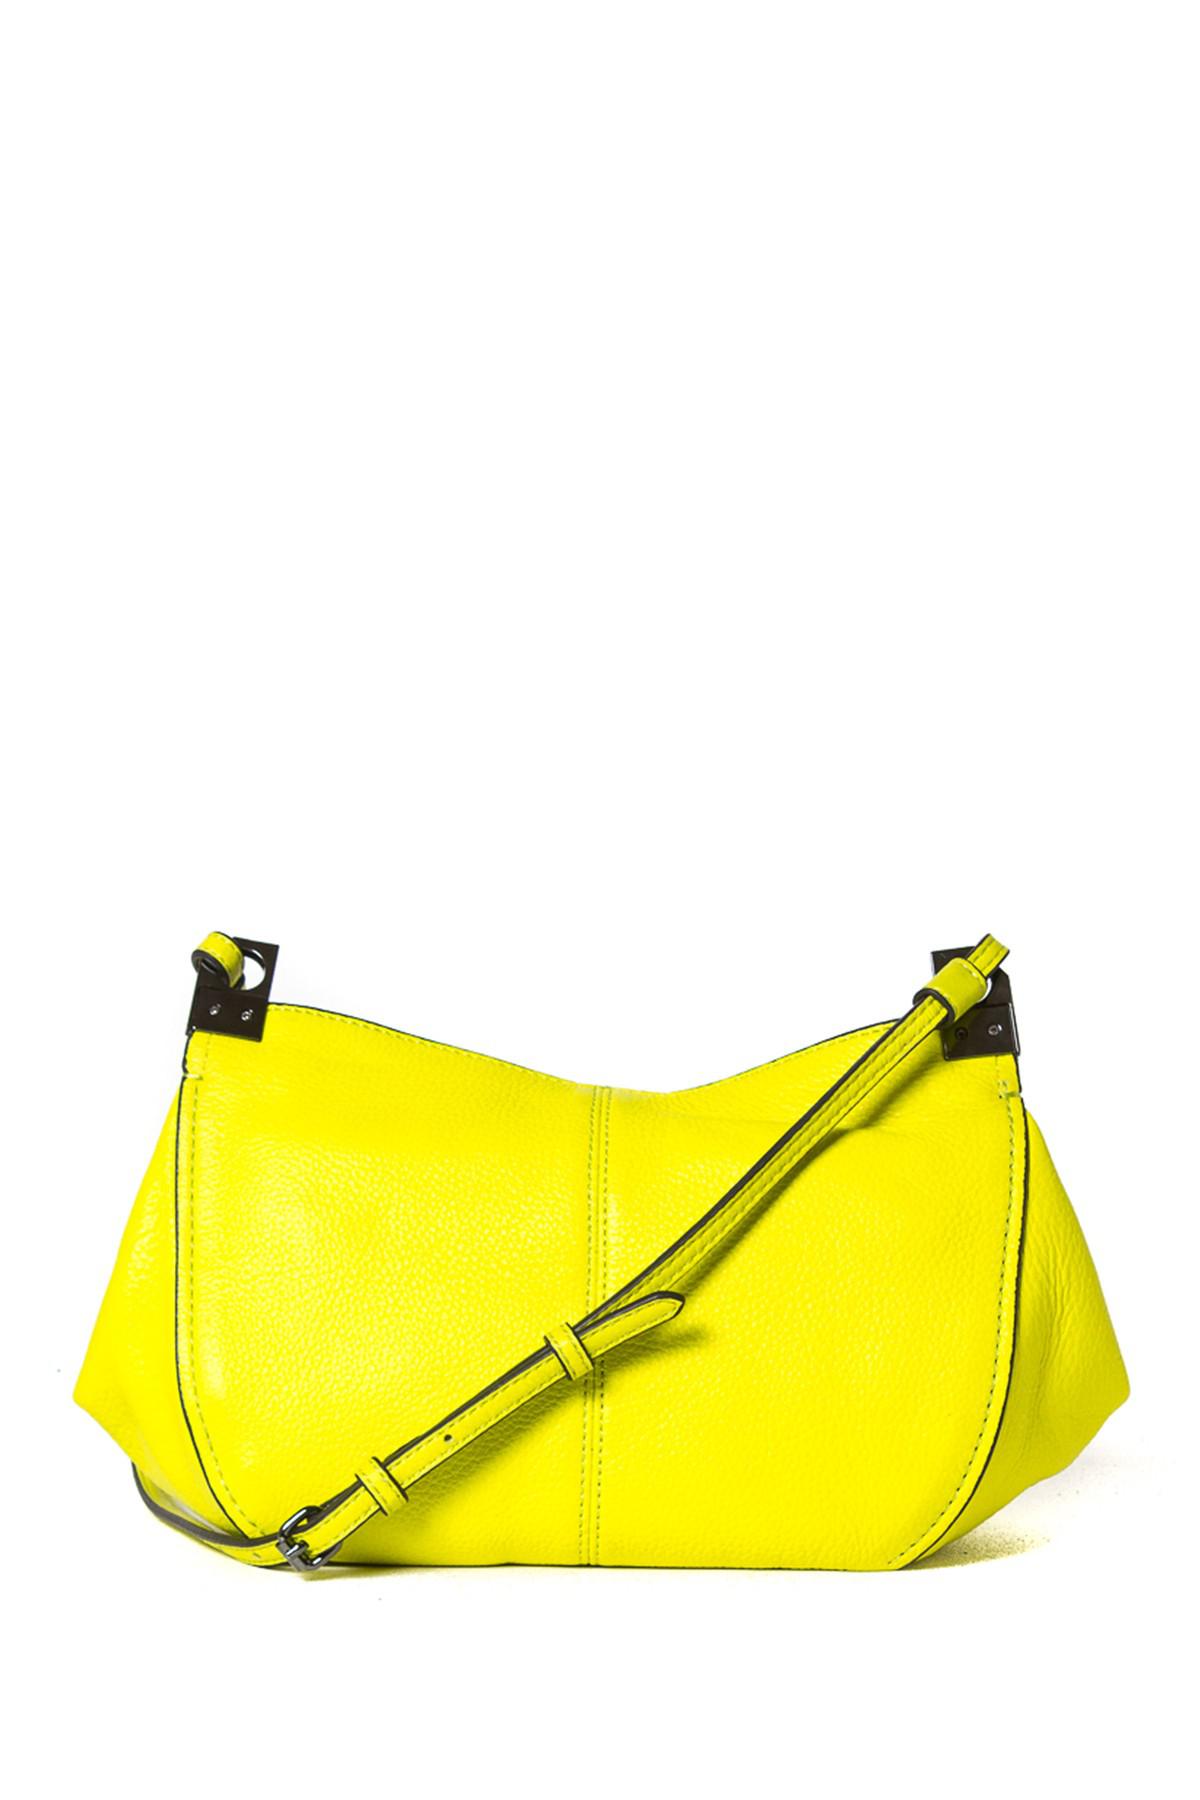 Aimee Kestenberg Oliver Leather Studded Crossbody Bag in Yellow - Lyst